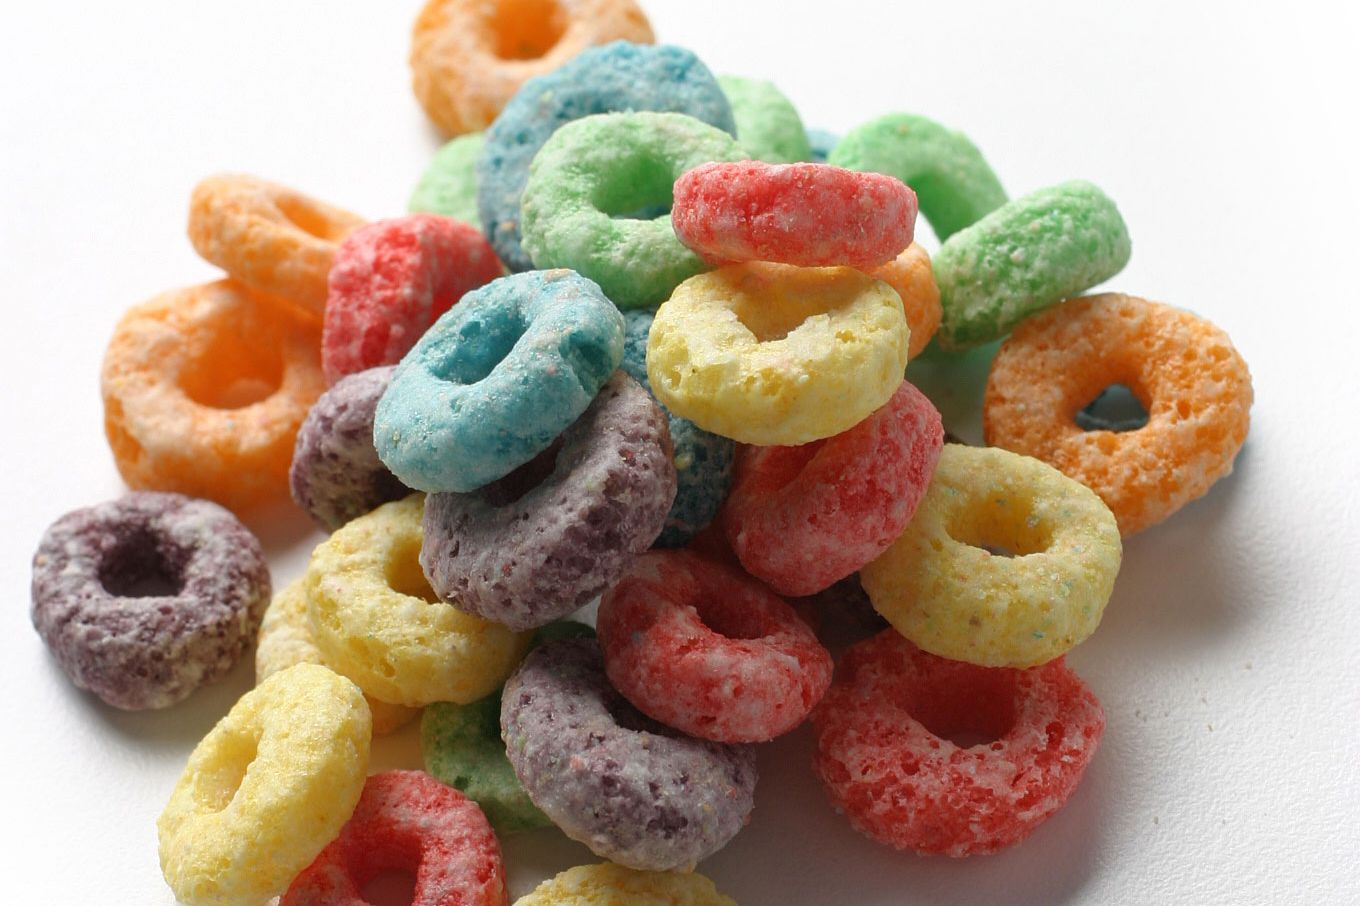 Kellogg's Announces Plan to Ruin Froot Loops Forever